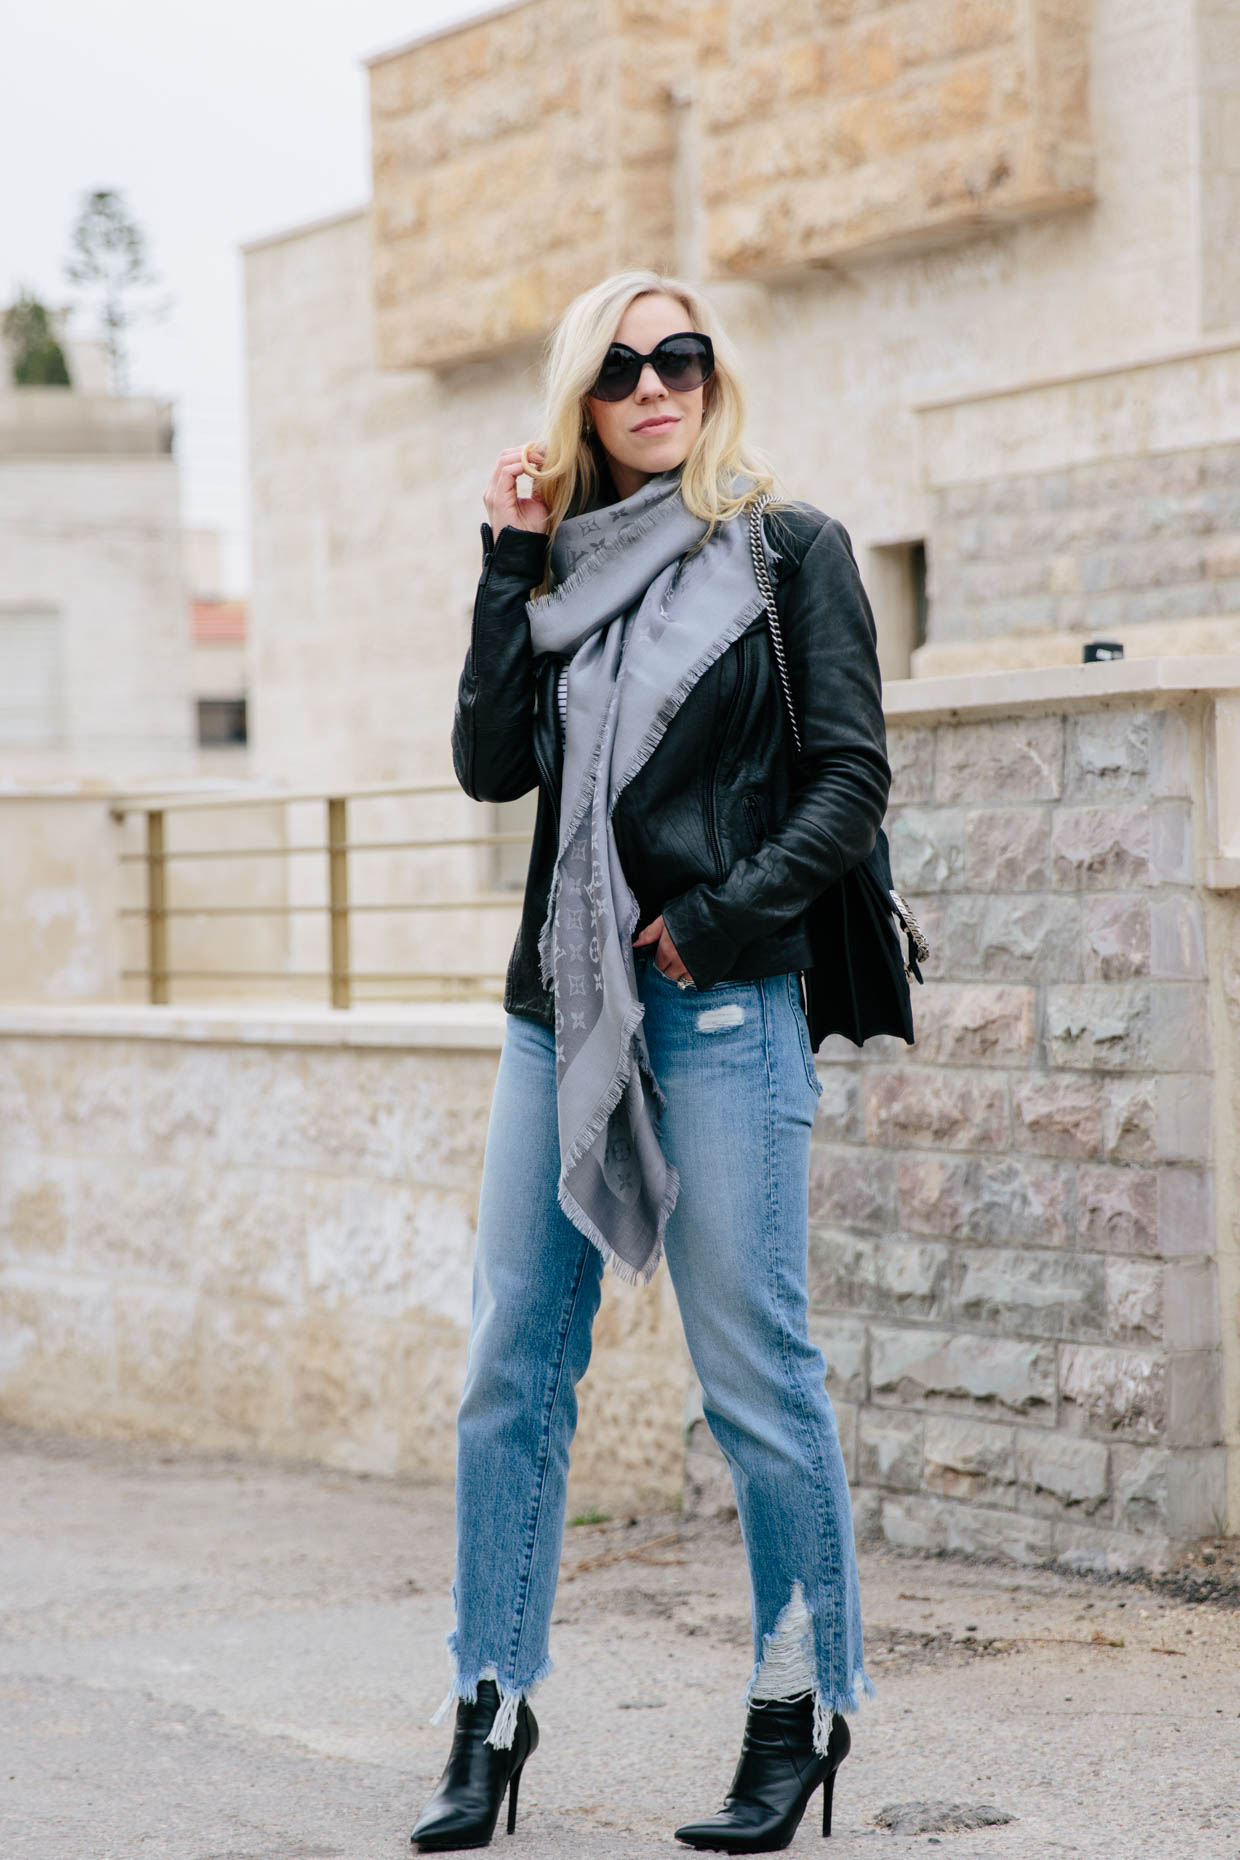 All-Season Layered Look with a Leather Jacket & Straight Leg Jeans